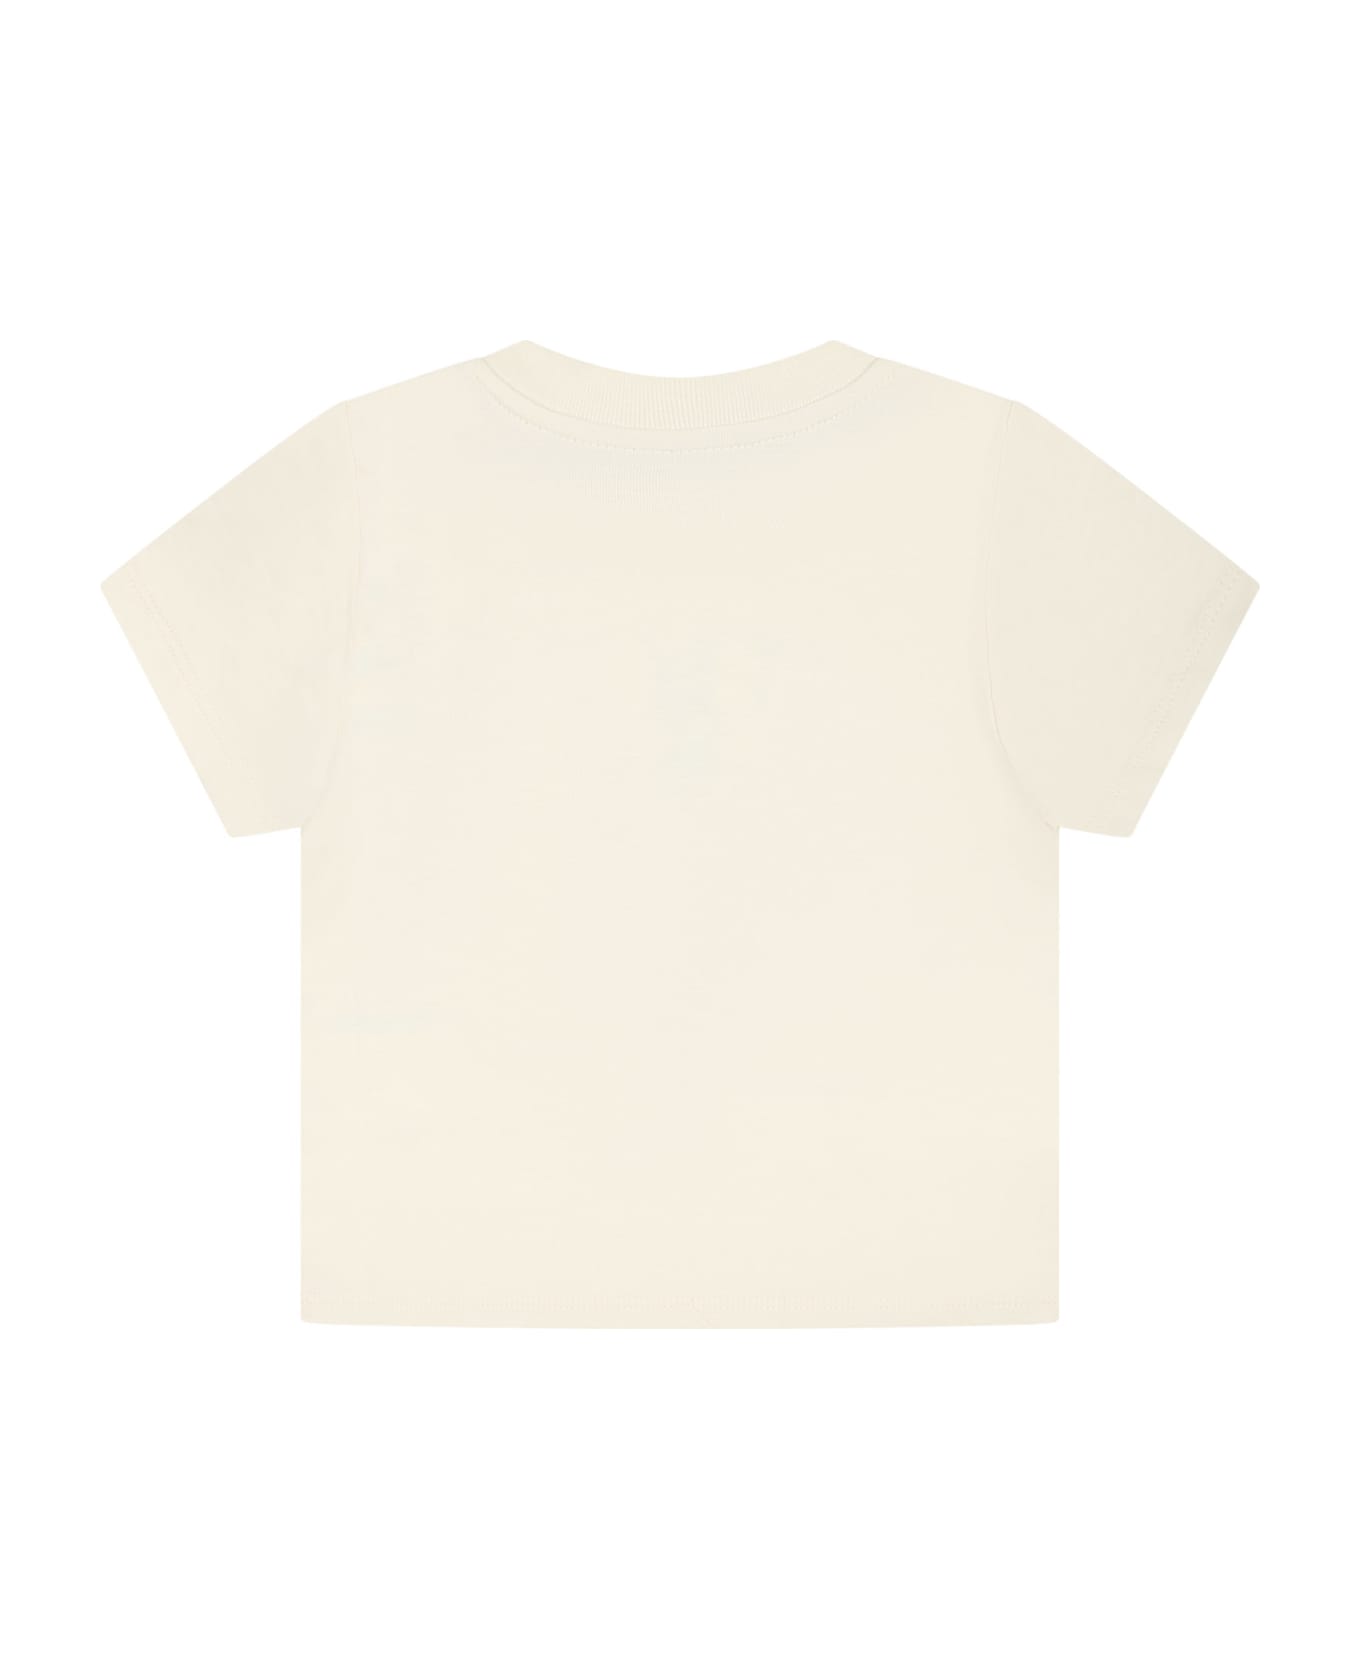 Gucci Ivory T-shirt For Baby Girl With Peter Rabbit Tシャツ＆ポロシャツ